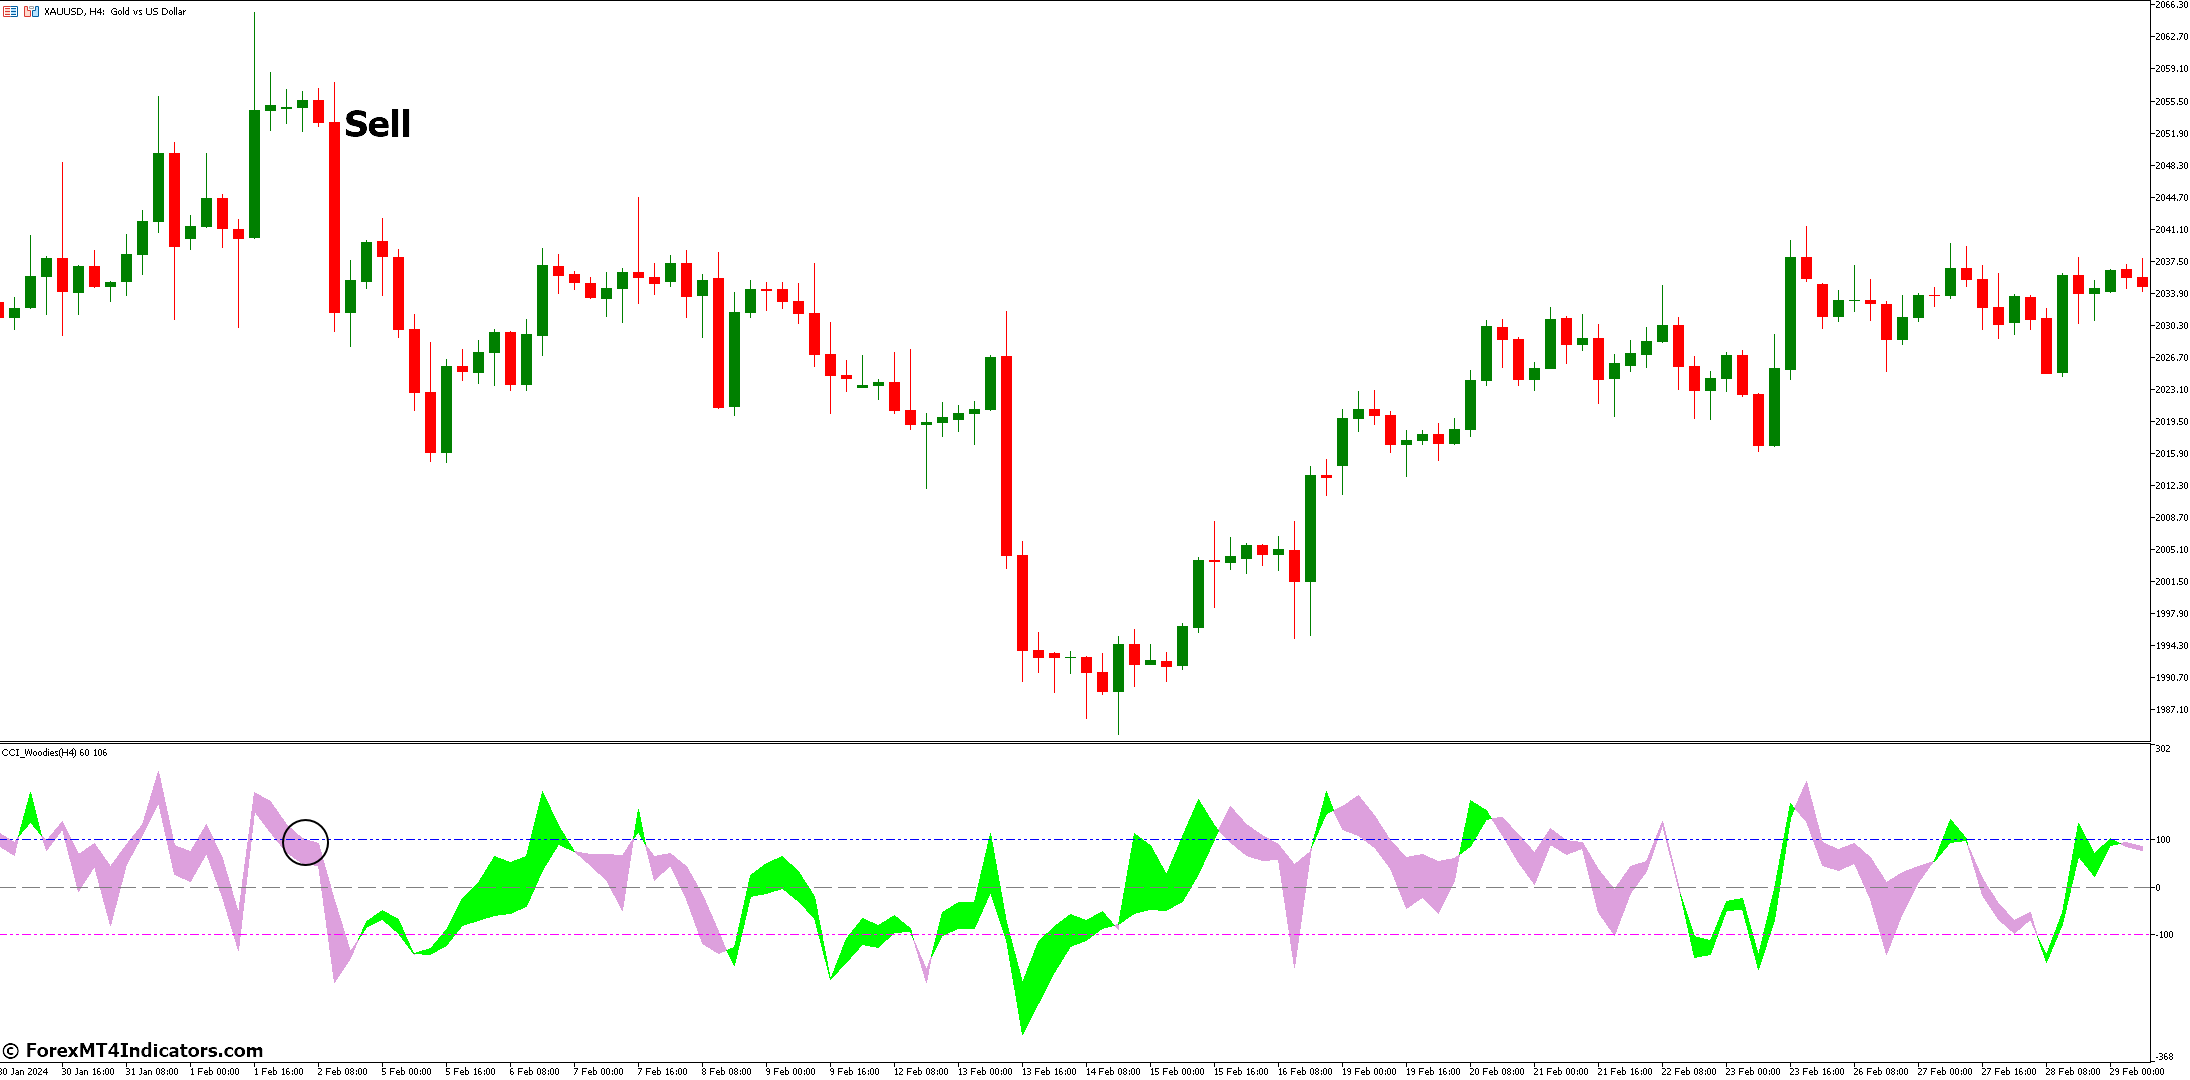 How to Trade with CCI Woodies HTF Forex Indicator - Sell Entry